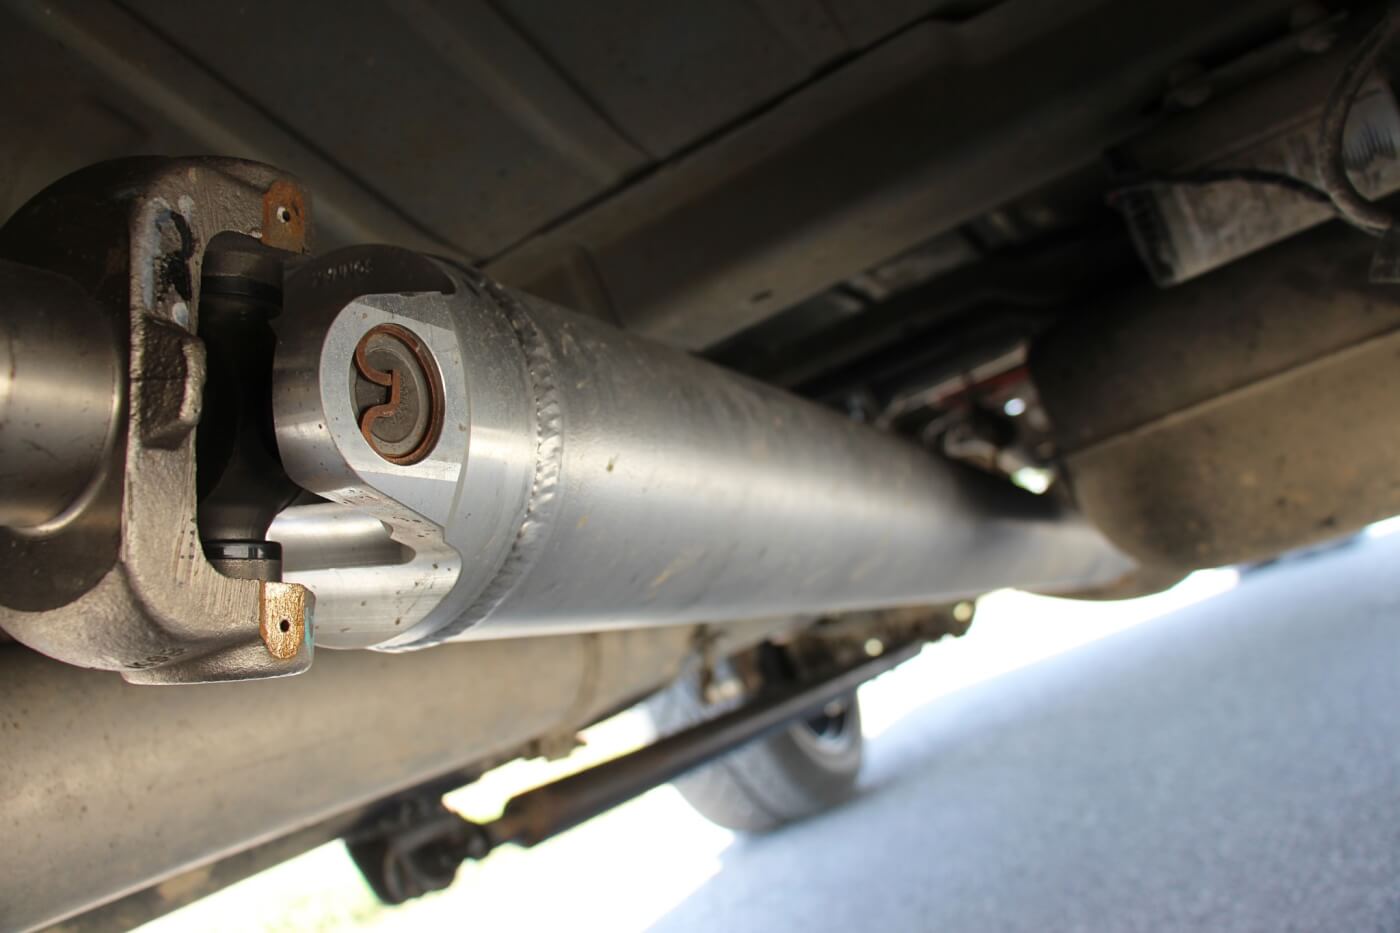 Beefing up the driveline is a 5-inch heavy-wall aluminum rear driveshaft from Columbus Joint & Clutch out of Grove City, Ohio. This serious piece of hardware incorporates 1550 series Spicer U-joints, which are typically only seen in the truck-pulling world.